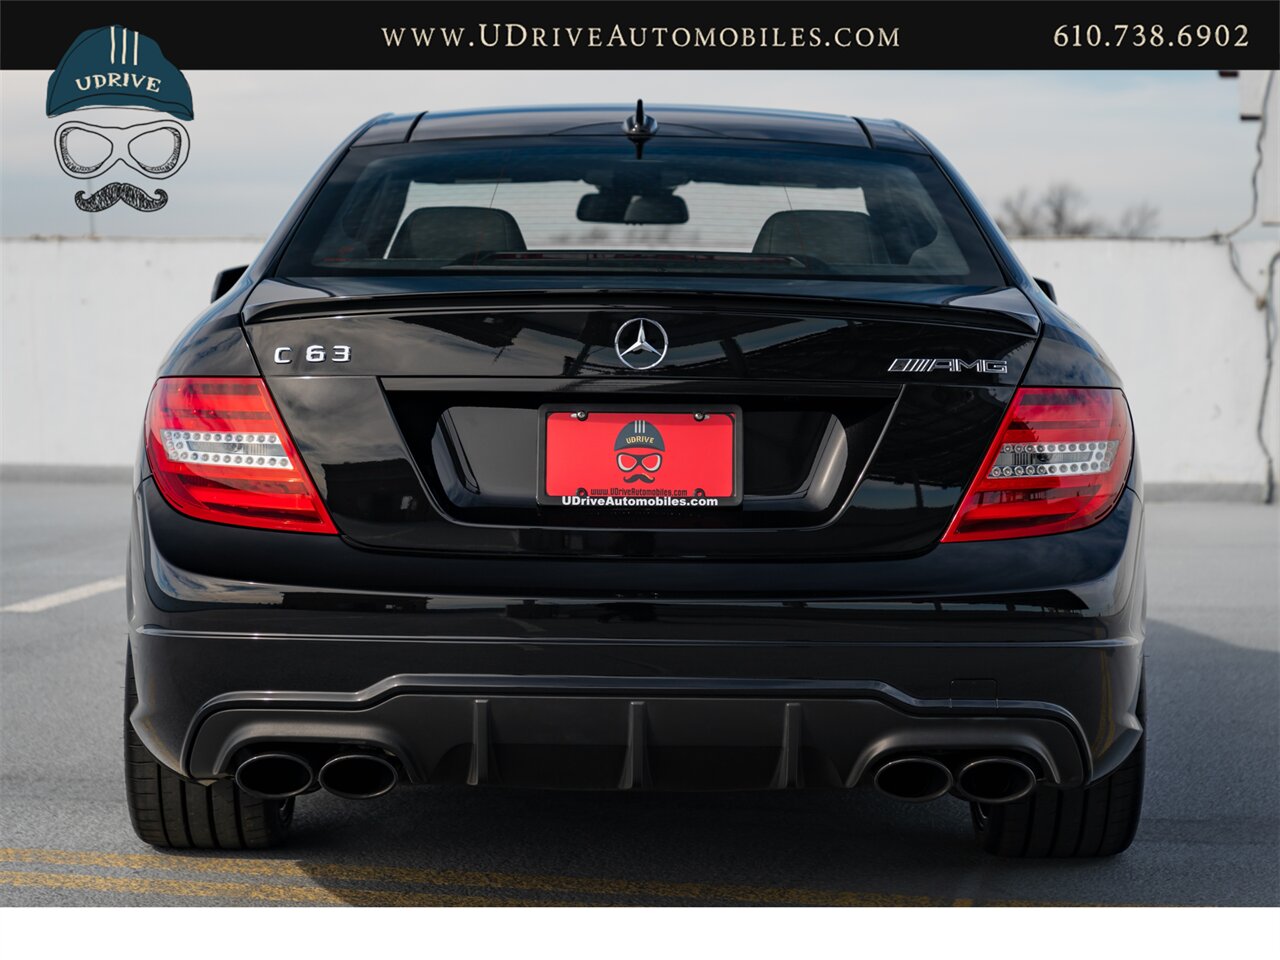 2015 Mercedes-Benz C63 AMG  Edition 507 17k Miles Pano Sunroof Locking Diff 507hp - Photo 21 - West Chester, PA 19382